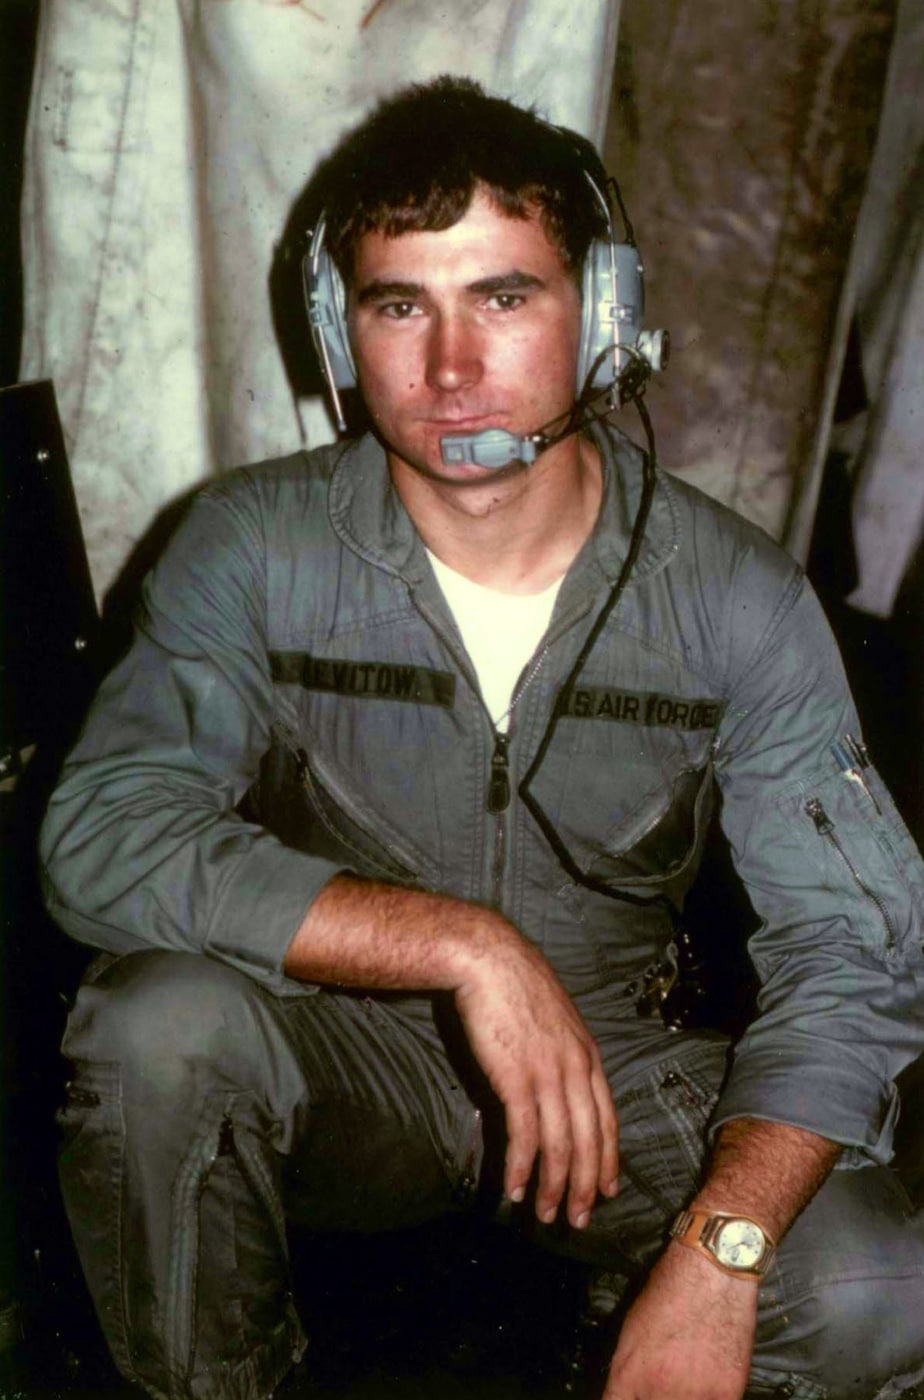 In this photograph, we see Airman 1st Class John Levitow. Levitow is wearing his uniform, an Air Force flight suit, and a radio headset so he can communicate with the pilot and other members of his military unit. Levitow received the Medal of Honor for gallantry in combat during a military operation on February 24, 1969.